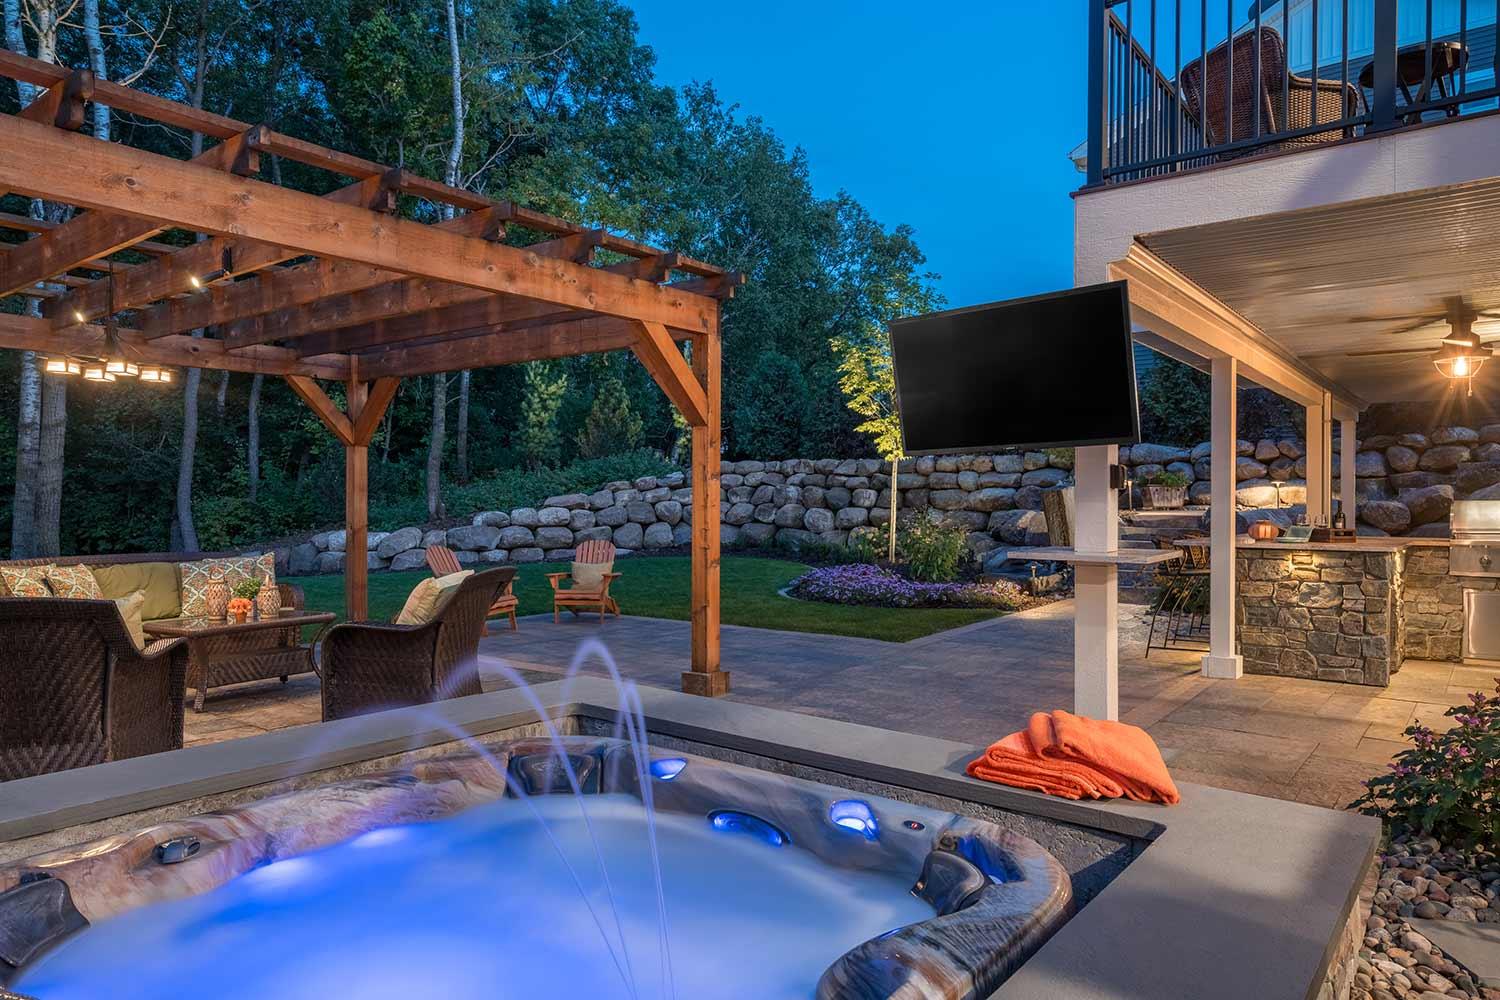 hot tub with lighting and jets, TV, kitchen, outdoor living room